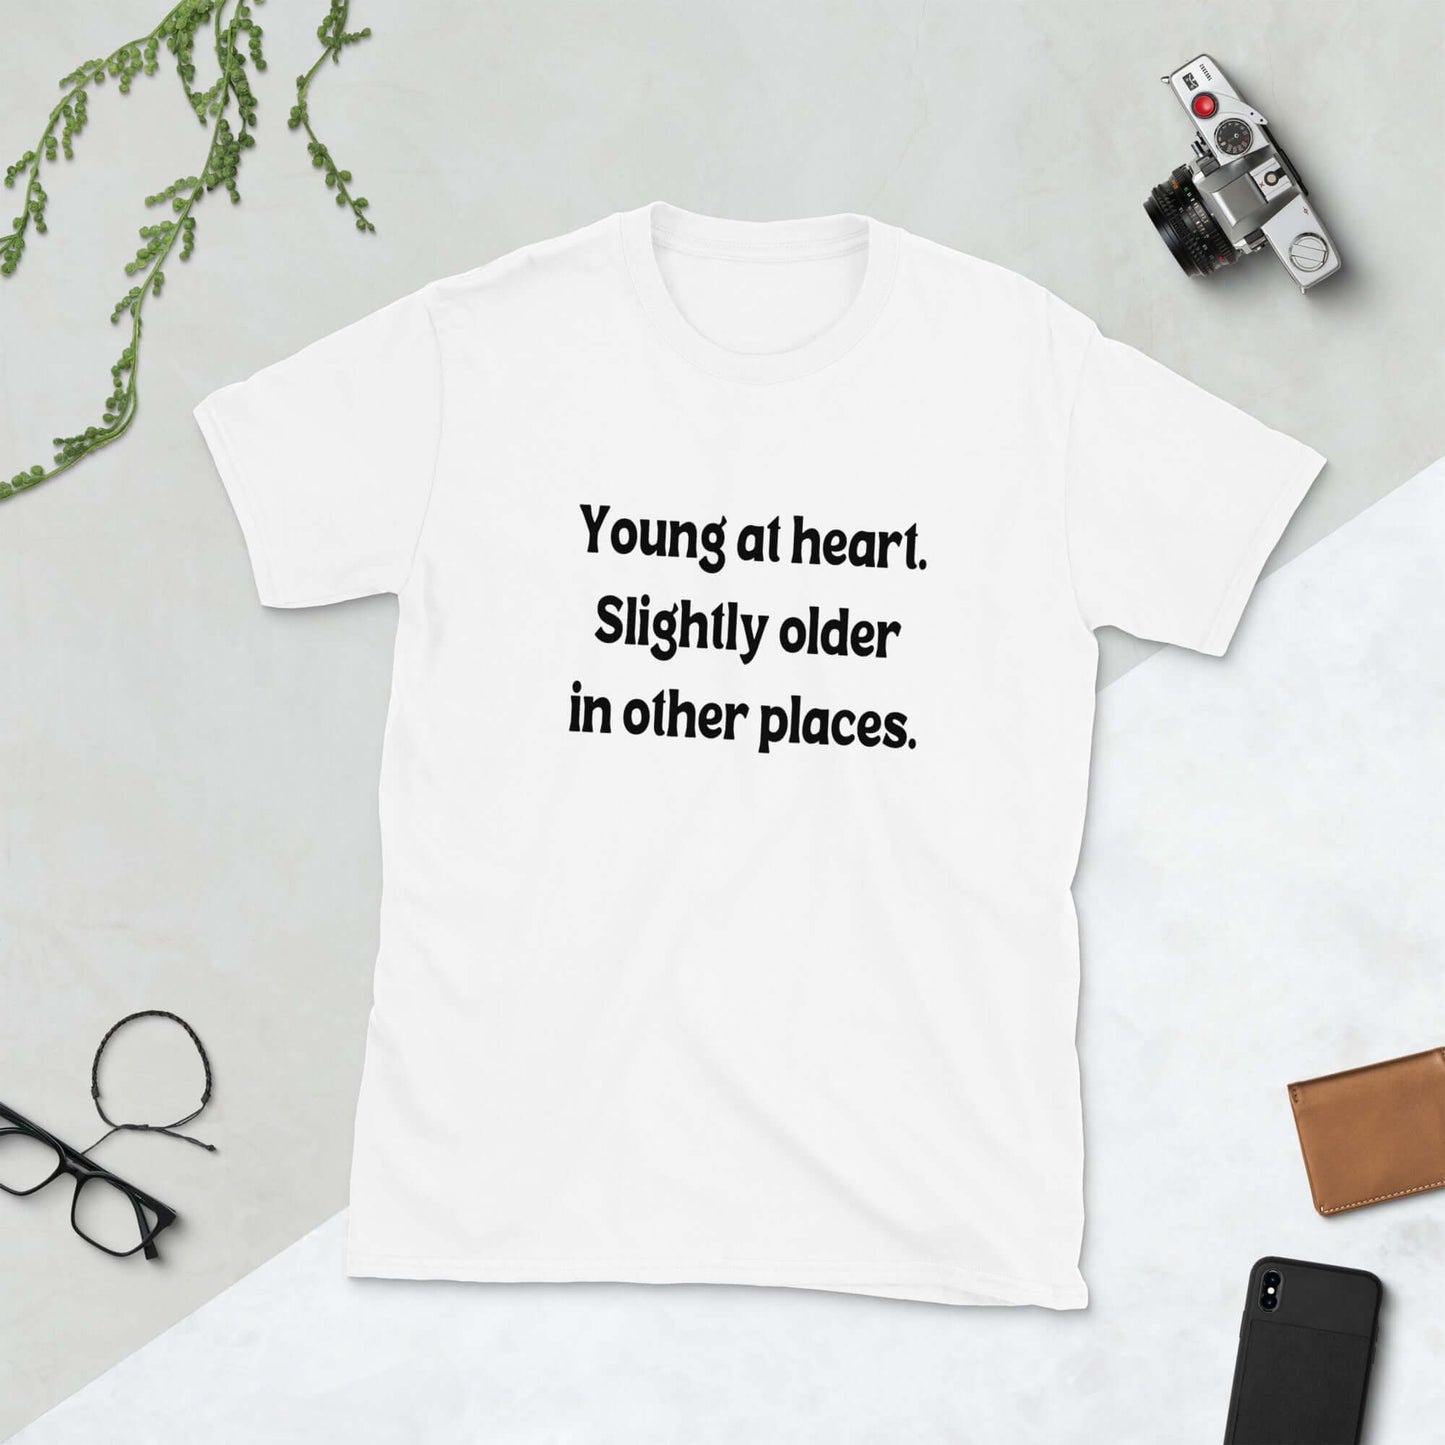 Young at heart funny t-shirt